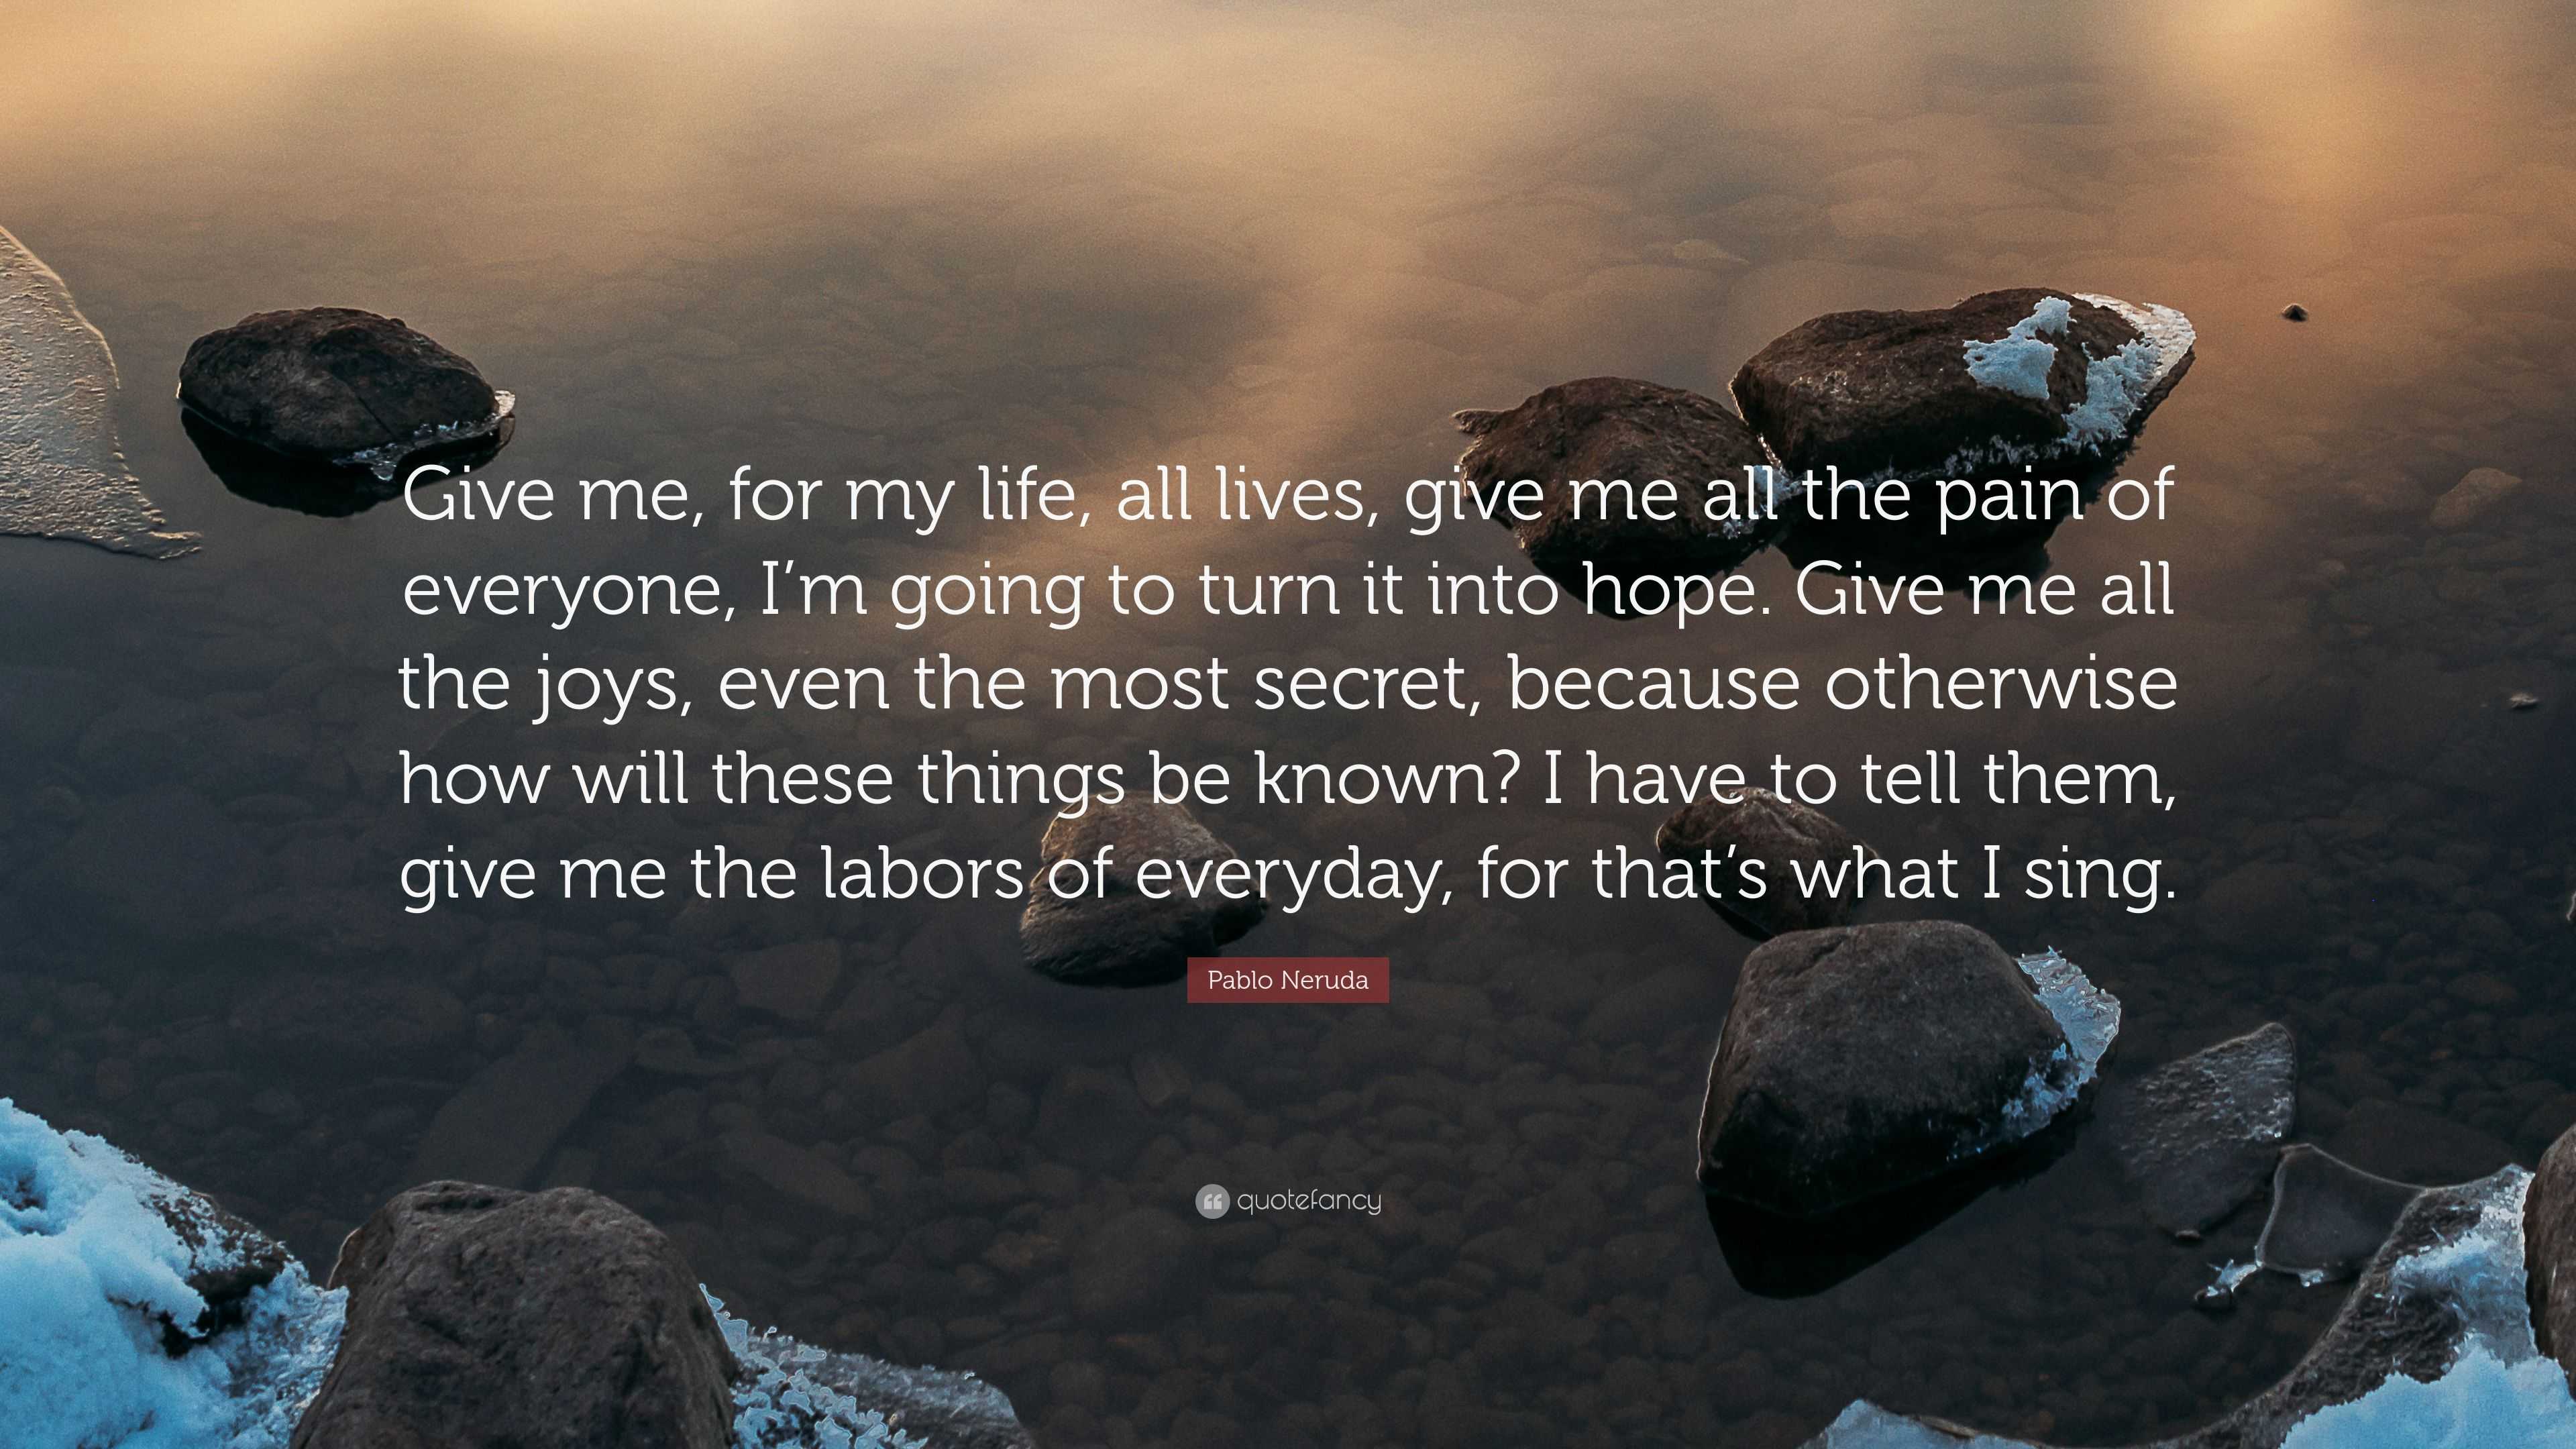 Pablo Neruda Quote: “Give me, for my life, all lives, give me all the ...